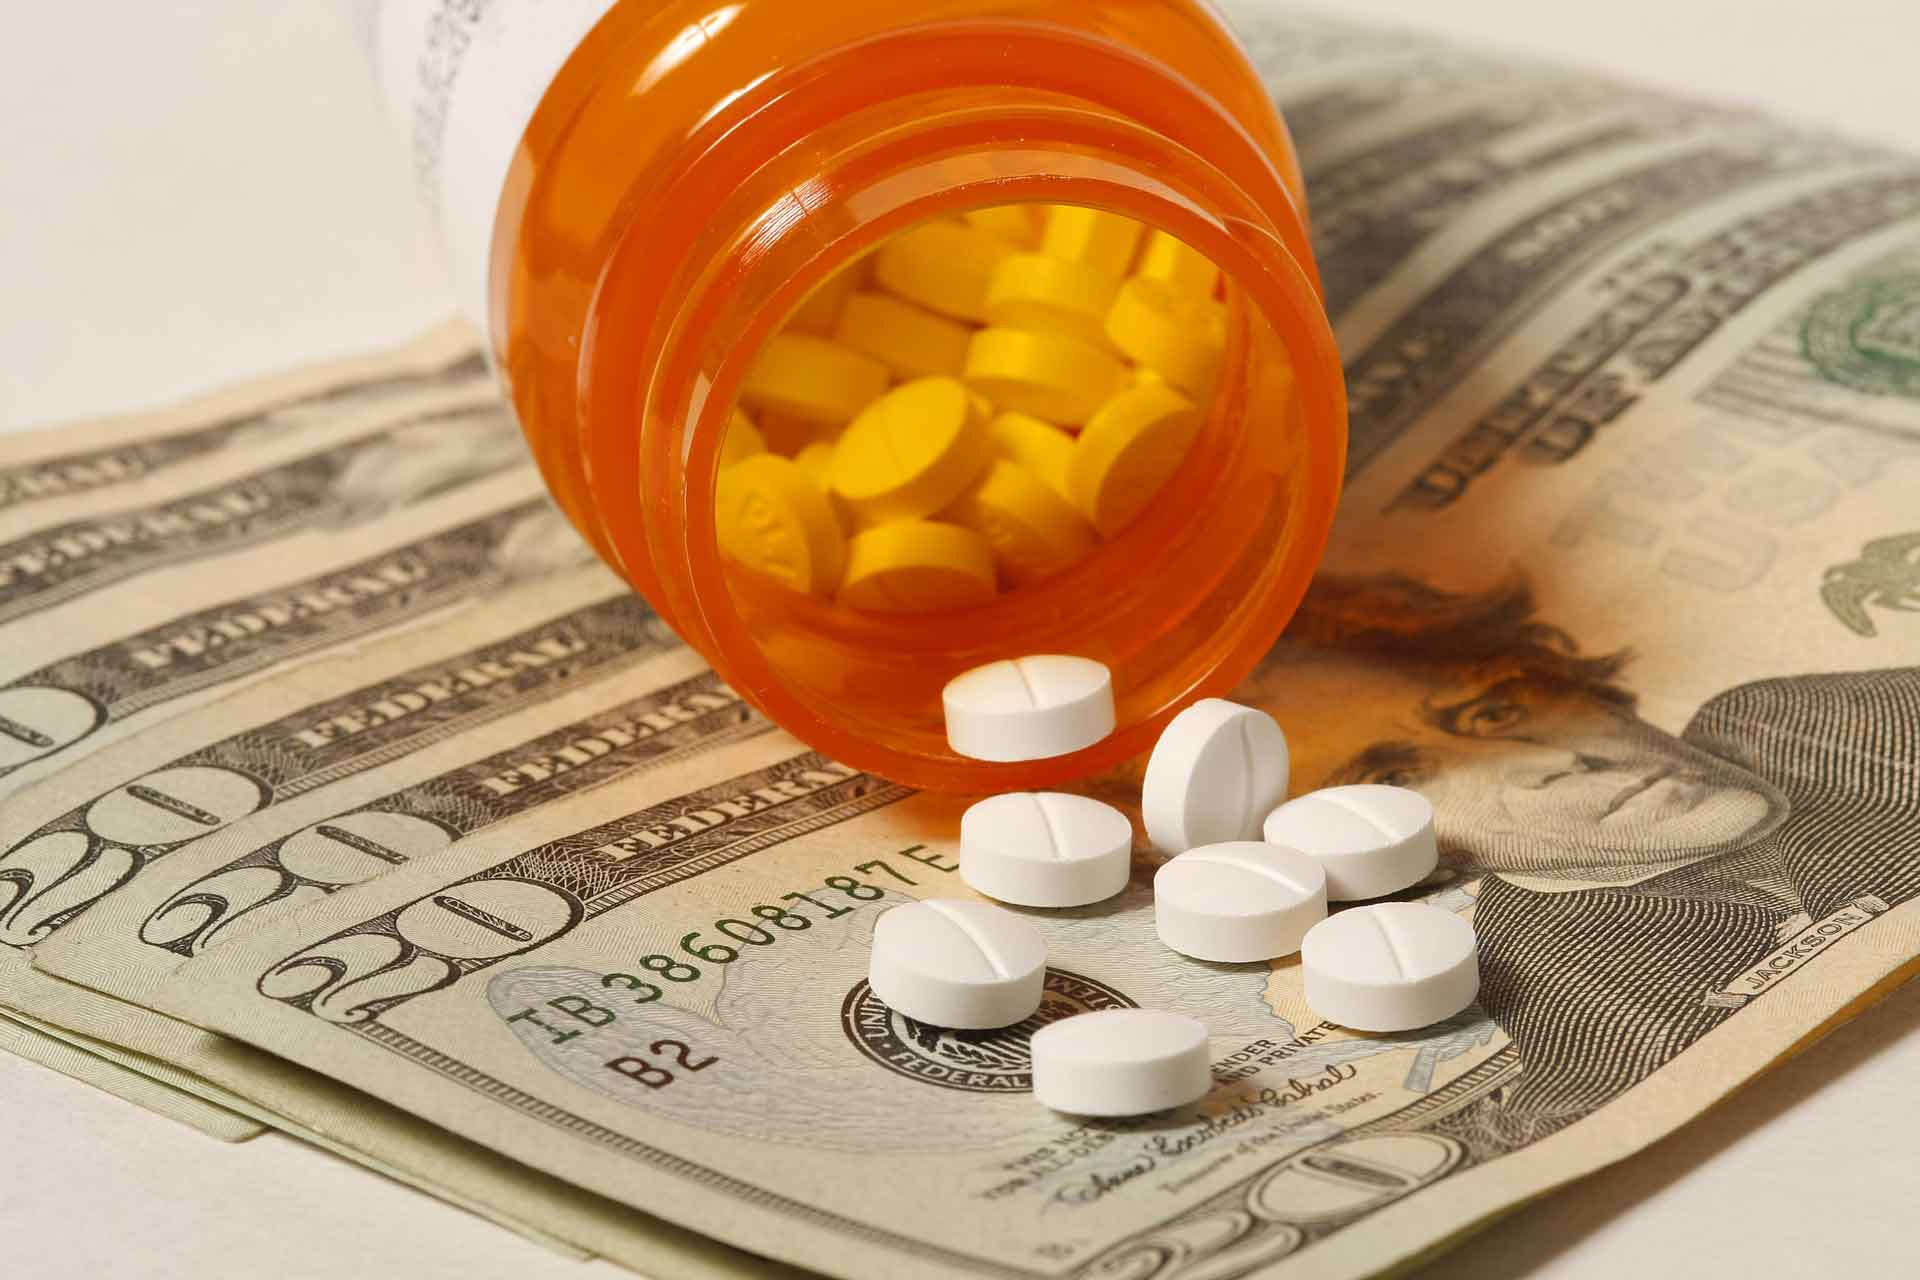 How PBMs Control and Diminish Physician Prescribing Efforts  